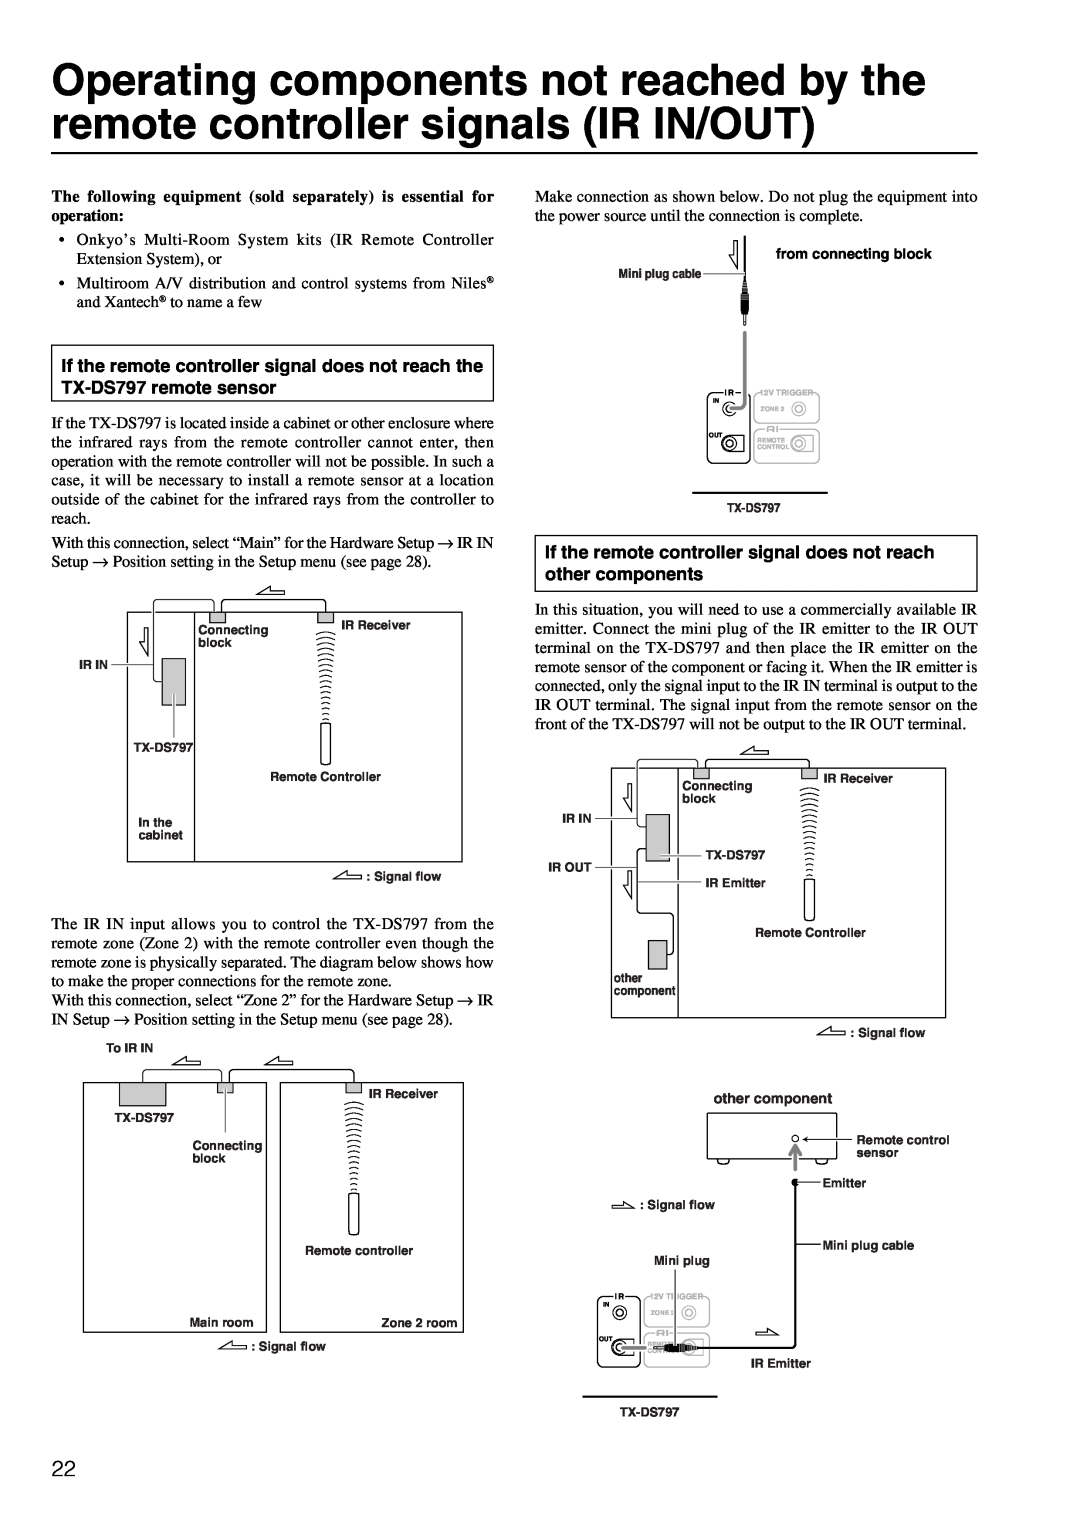 Onkyo TX-DS797 instruction manual from connecting block, other component 